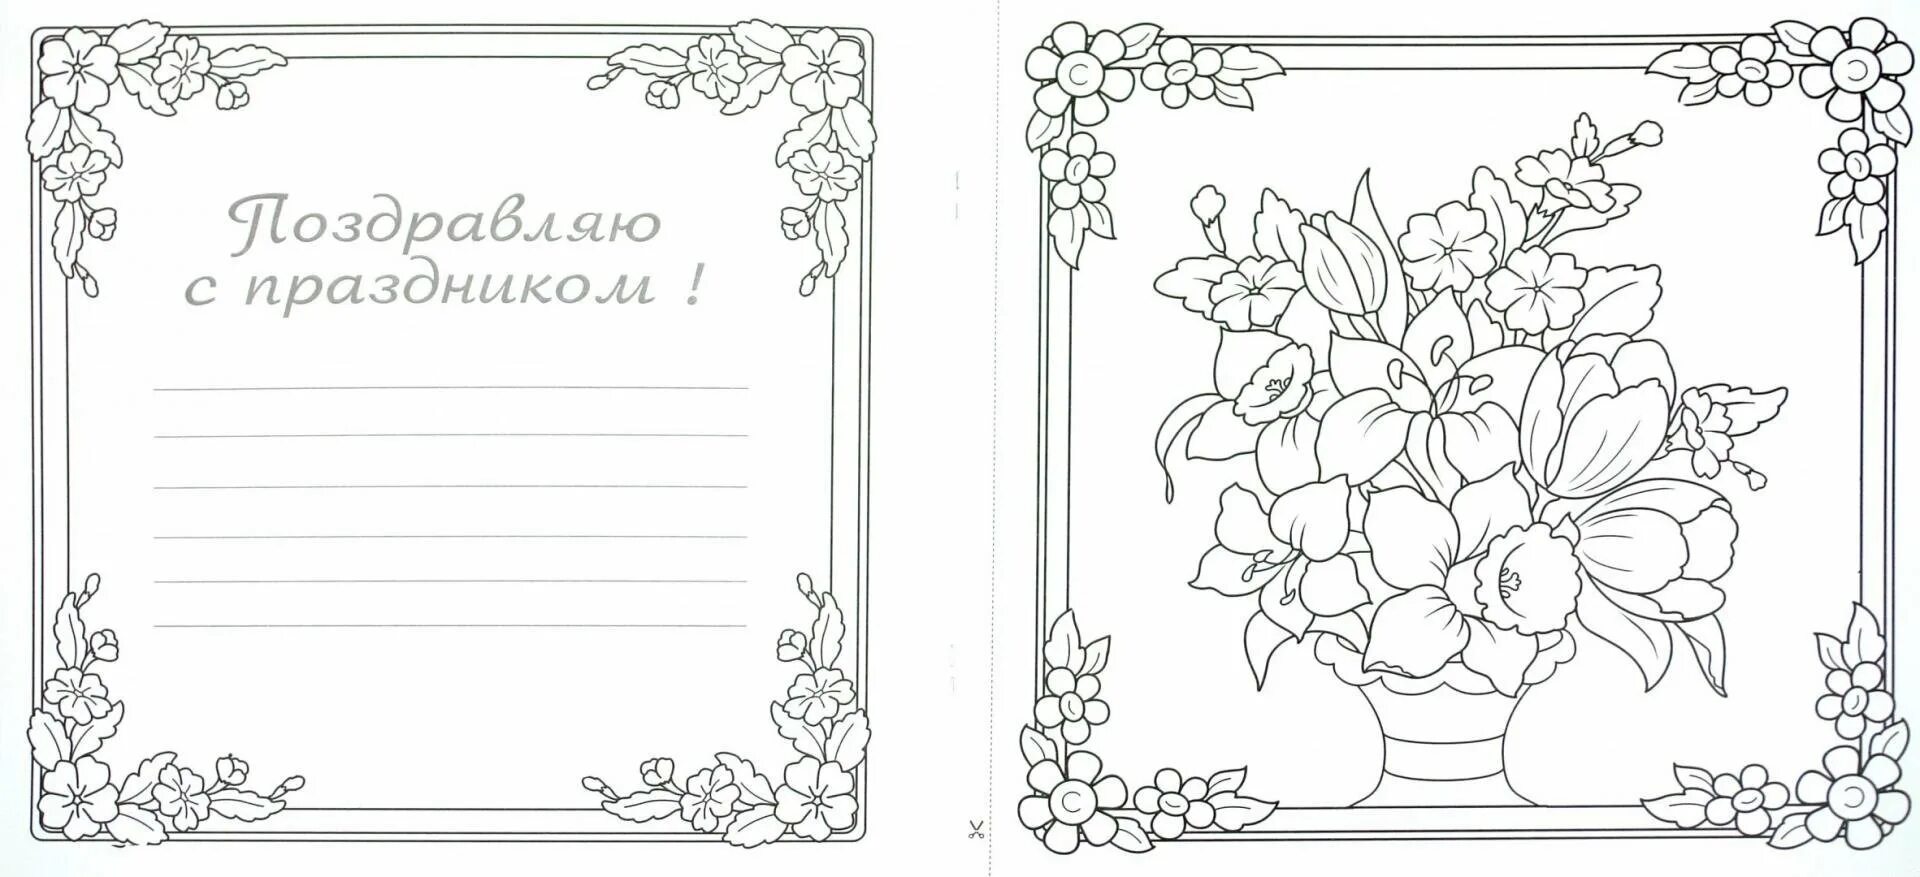 Exquisite grandmother coloring book